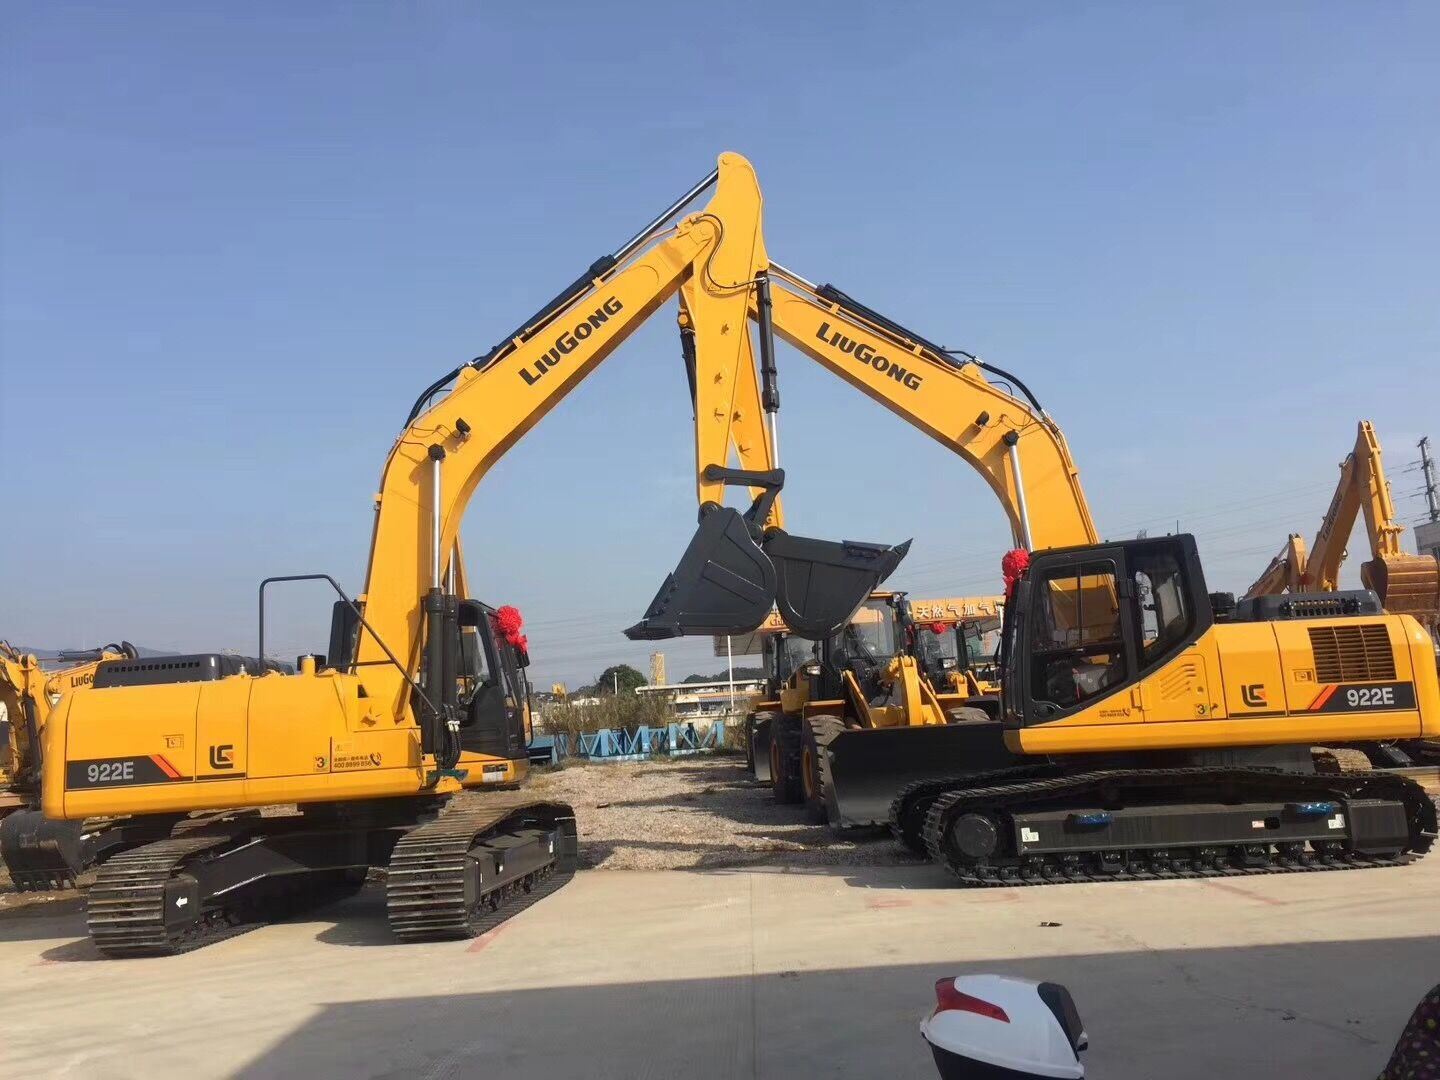 Liugong 924e 25ton Crawler Excavator From China with Good Price